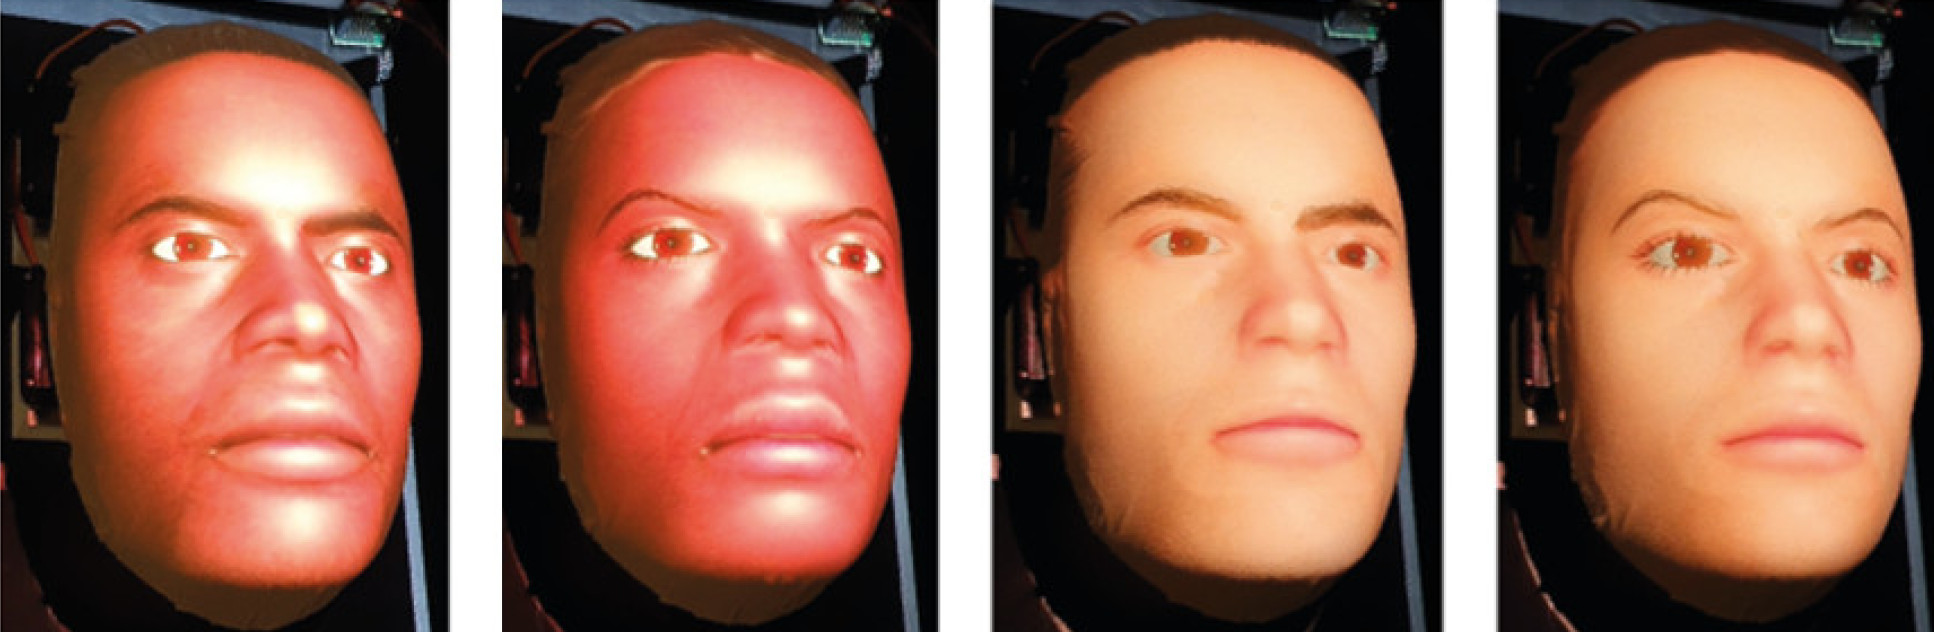 The MorphFace robots